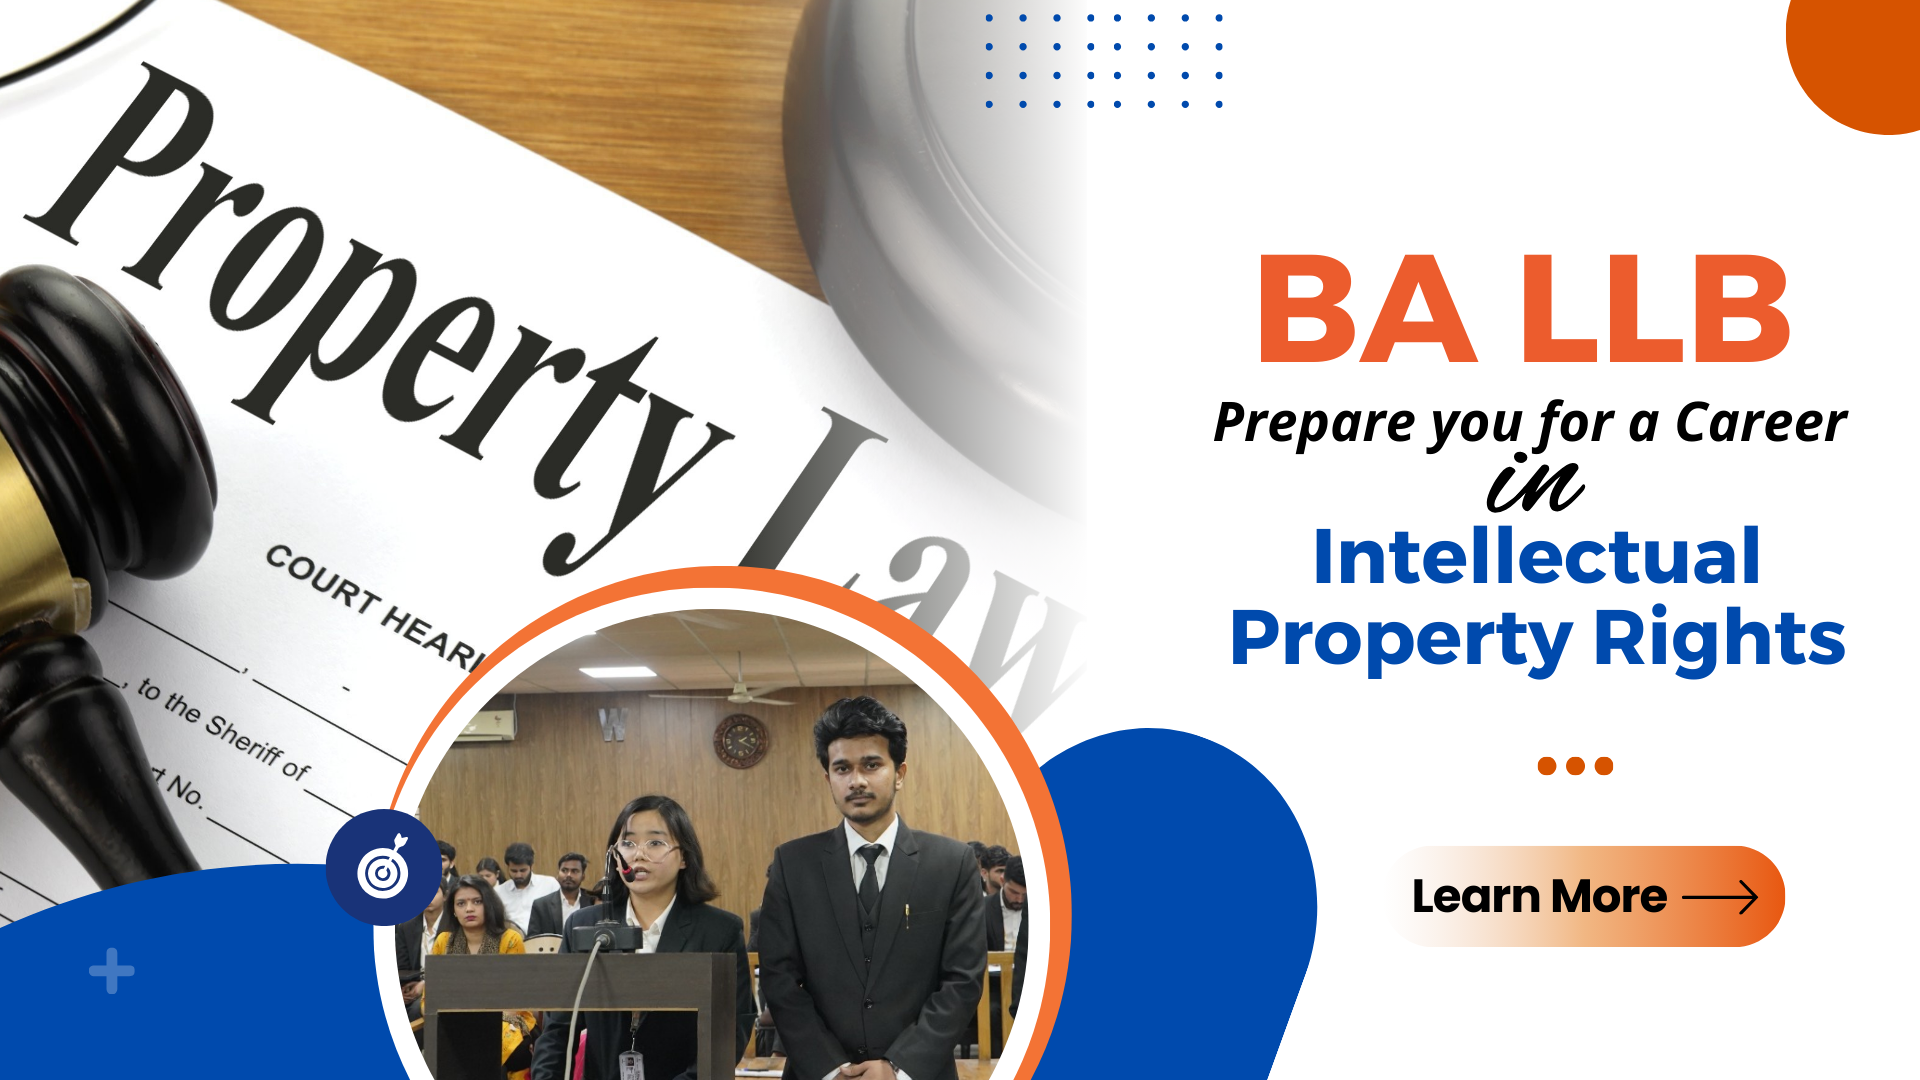 Can a BA LLB Prepare you for a Career in Intellectual Property Rights?